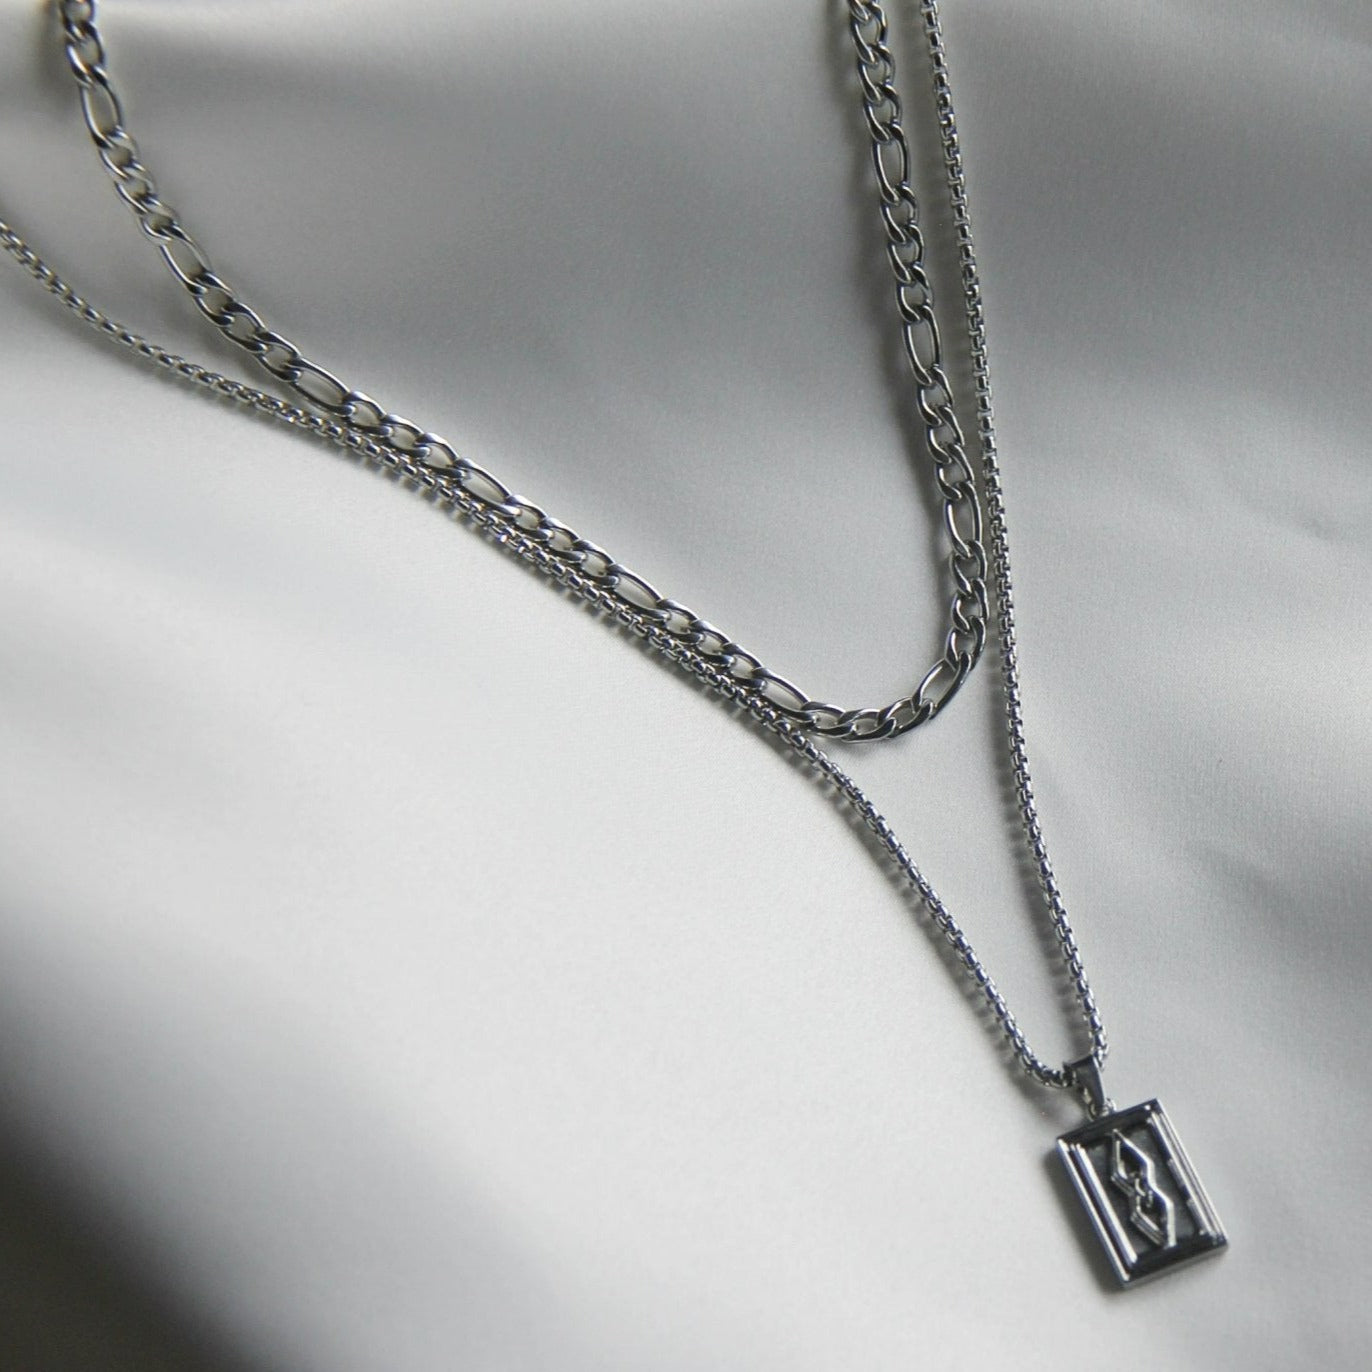 Fashionable and Popular 1pc Men Lock Chain Necklace Alloy for Jewelry Gift  and for a Stylish Look | SHEIN